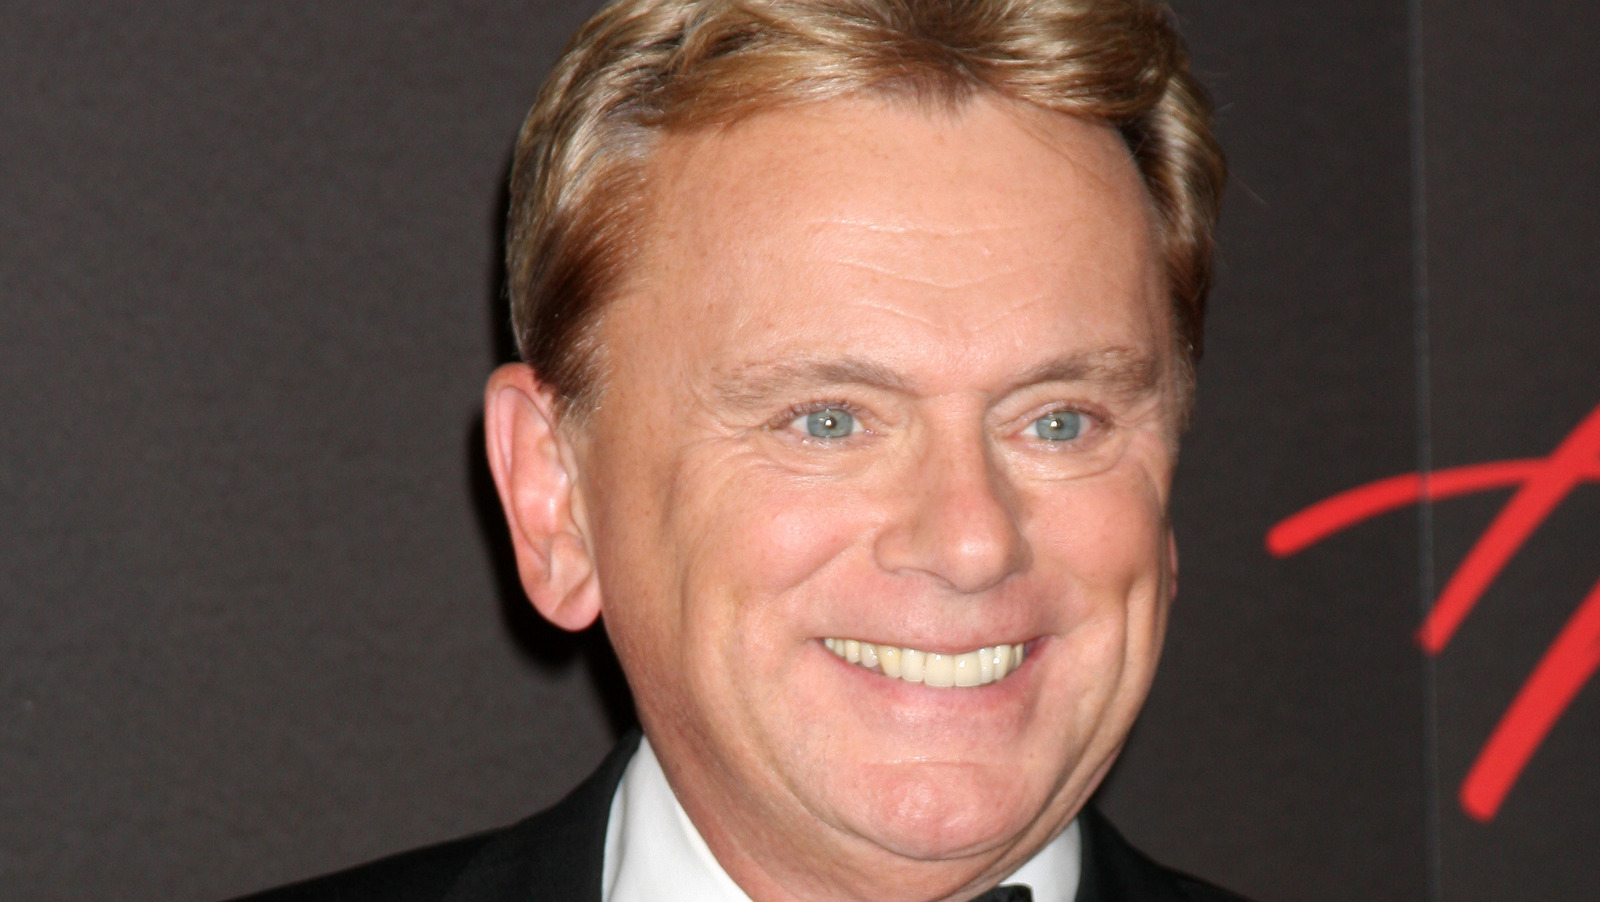 Pat Sajak's Net Worth The Wheel Of Fortune Host Makes More Than You Think